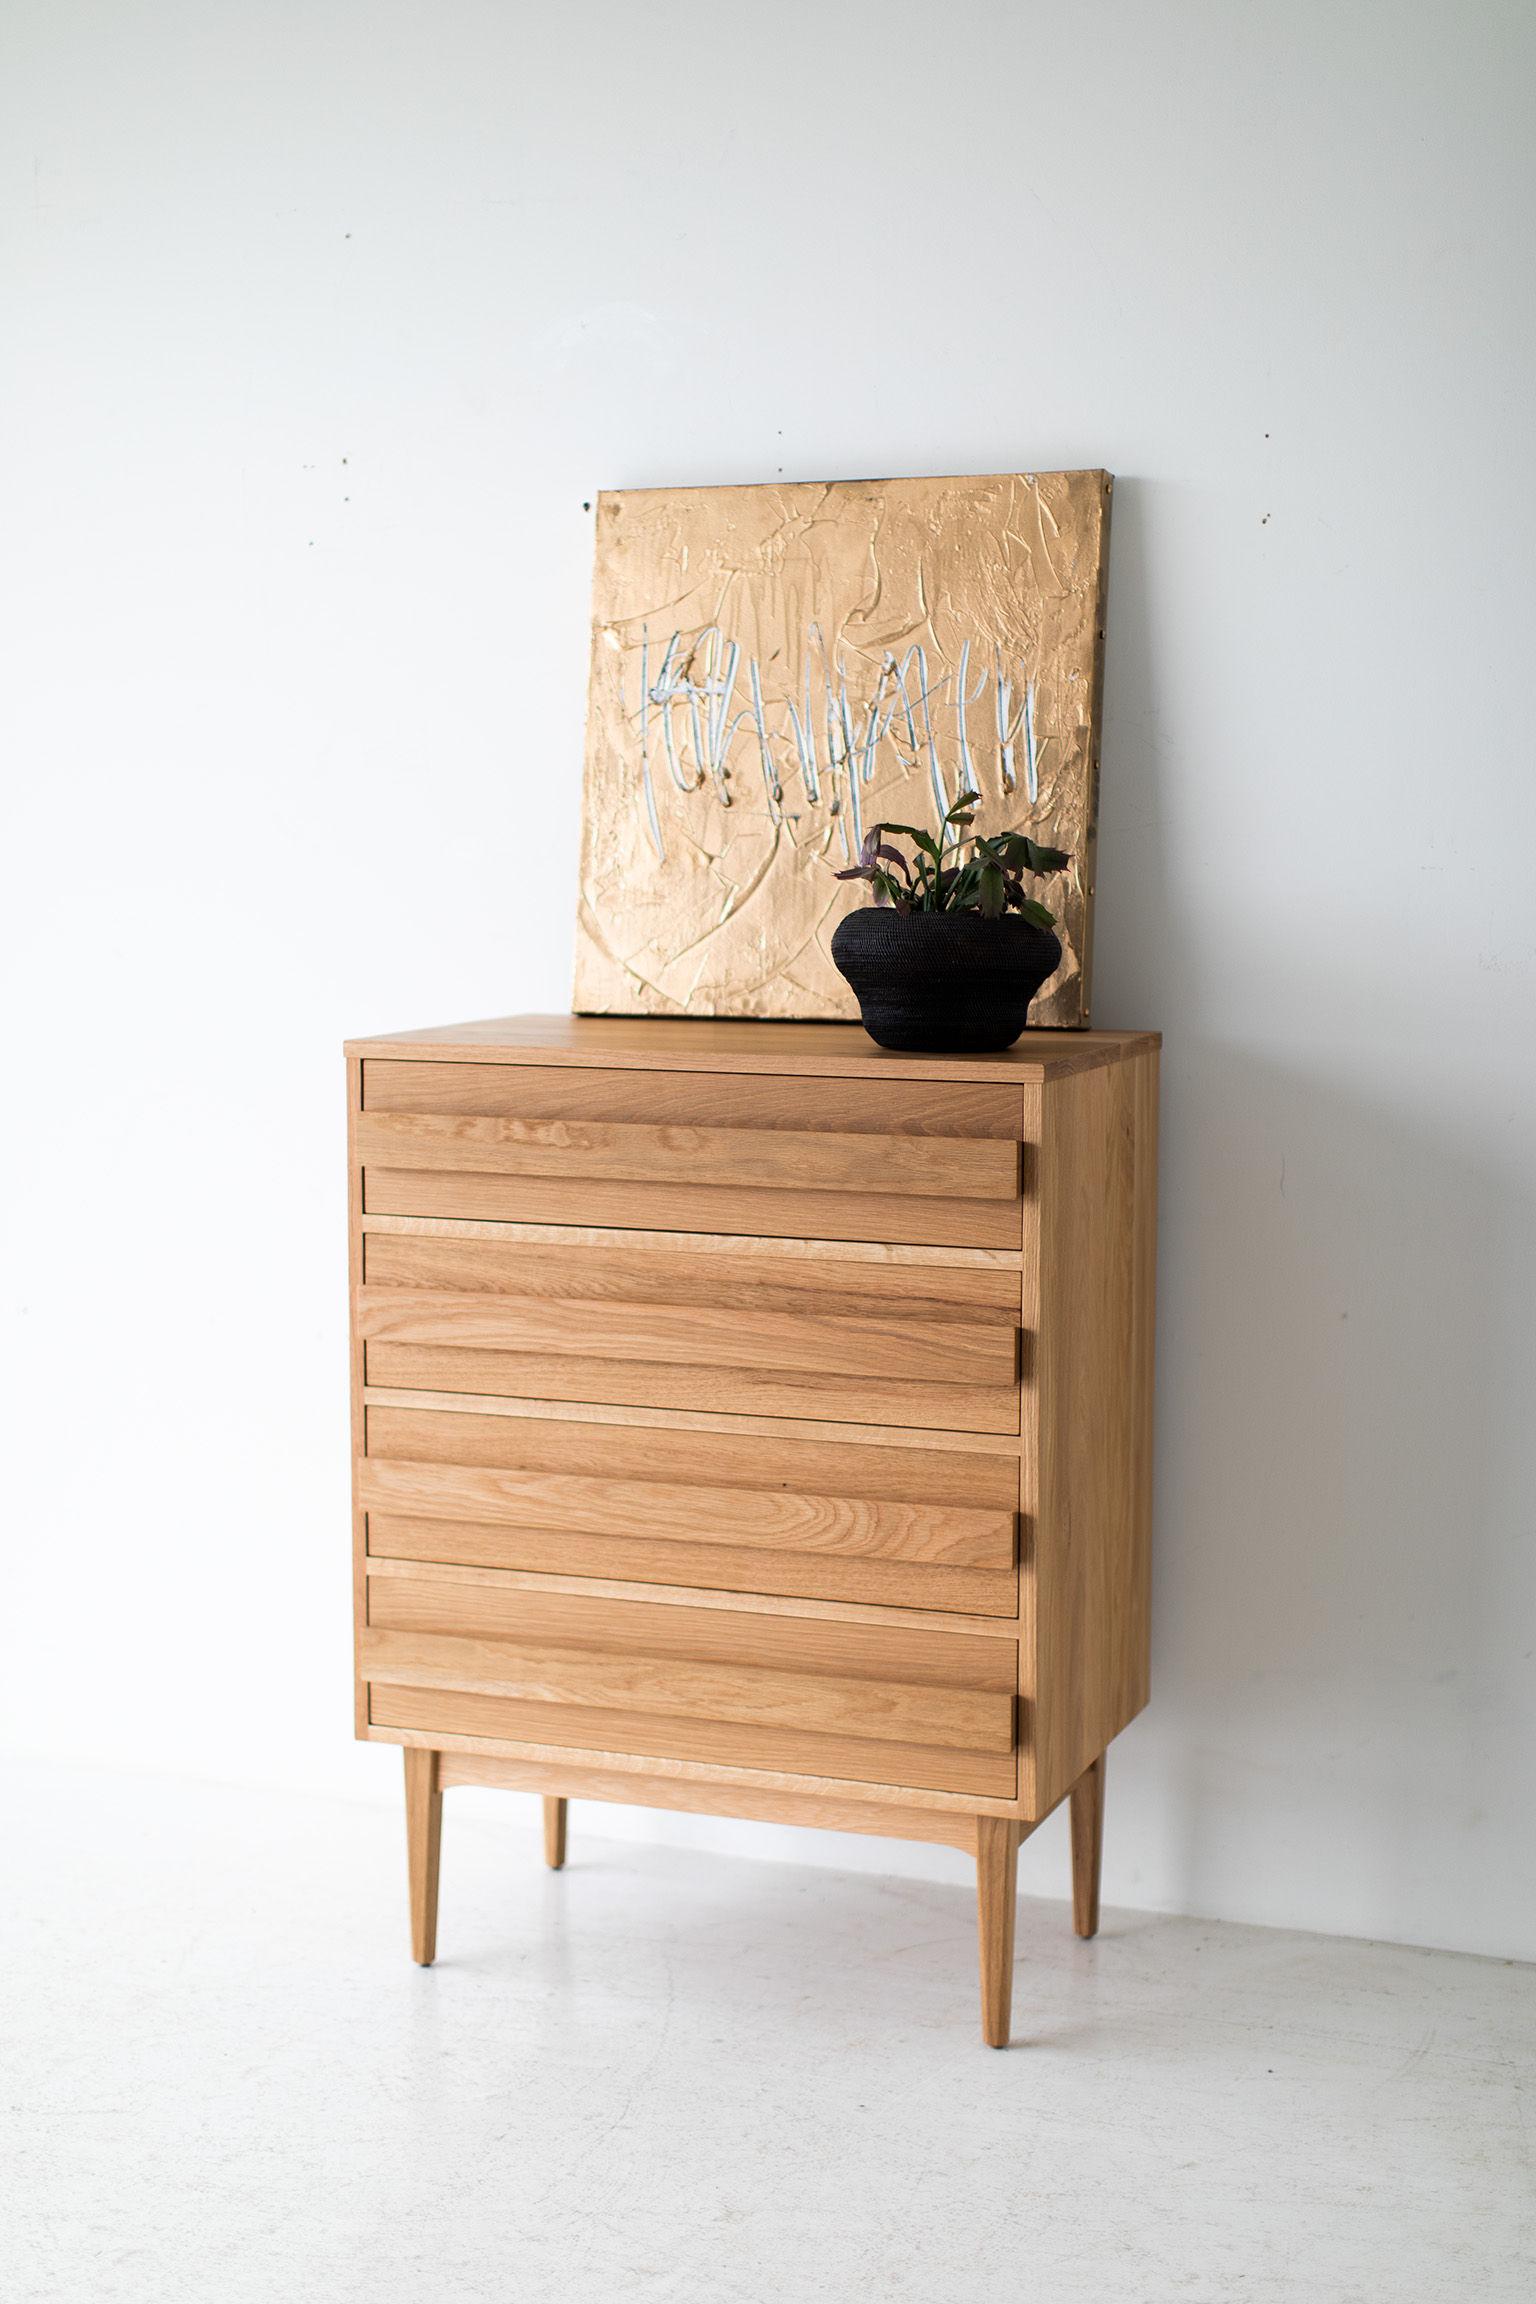 This Mid-Century Modern white oak dresser is made in the heart of Ohio with locally sourced wood. Each dresser is hand-made with solid white oak and finished with a beautiful matte commercial grade finish. It is important to us to let the natural